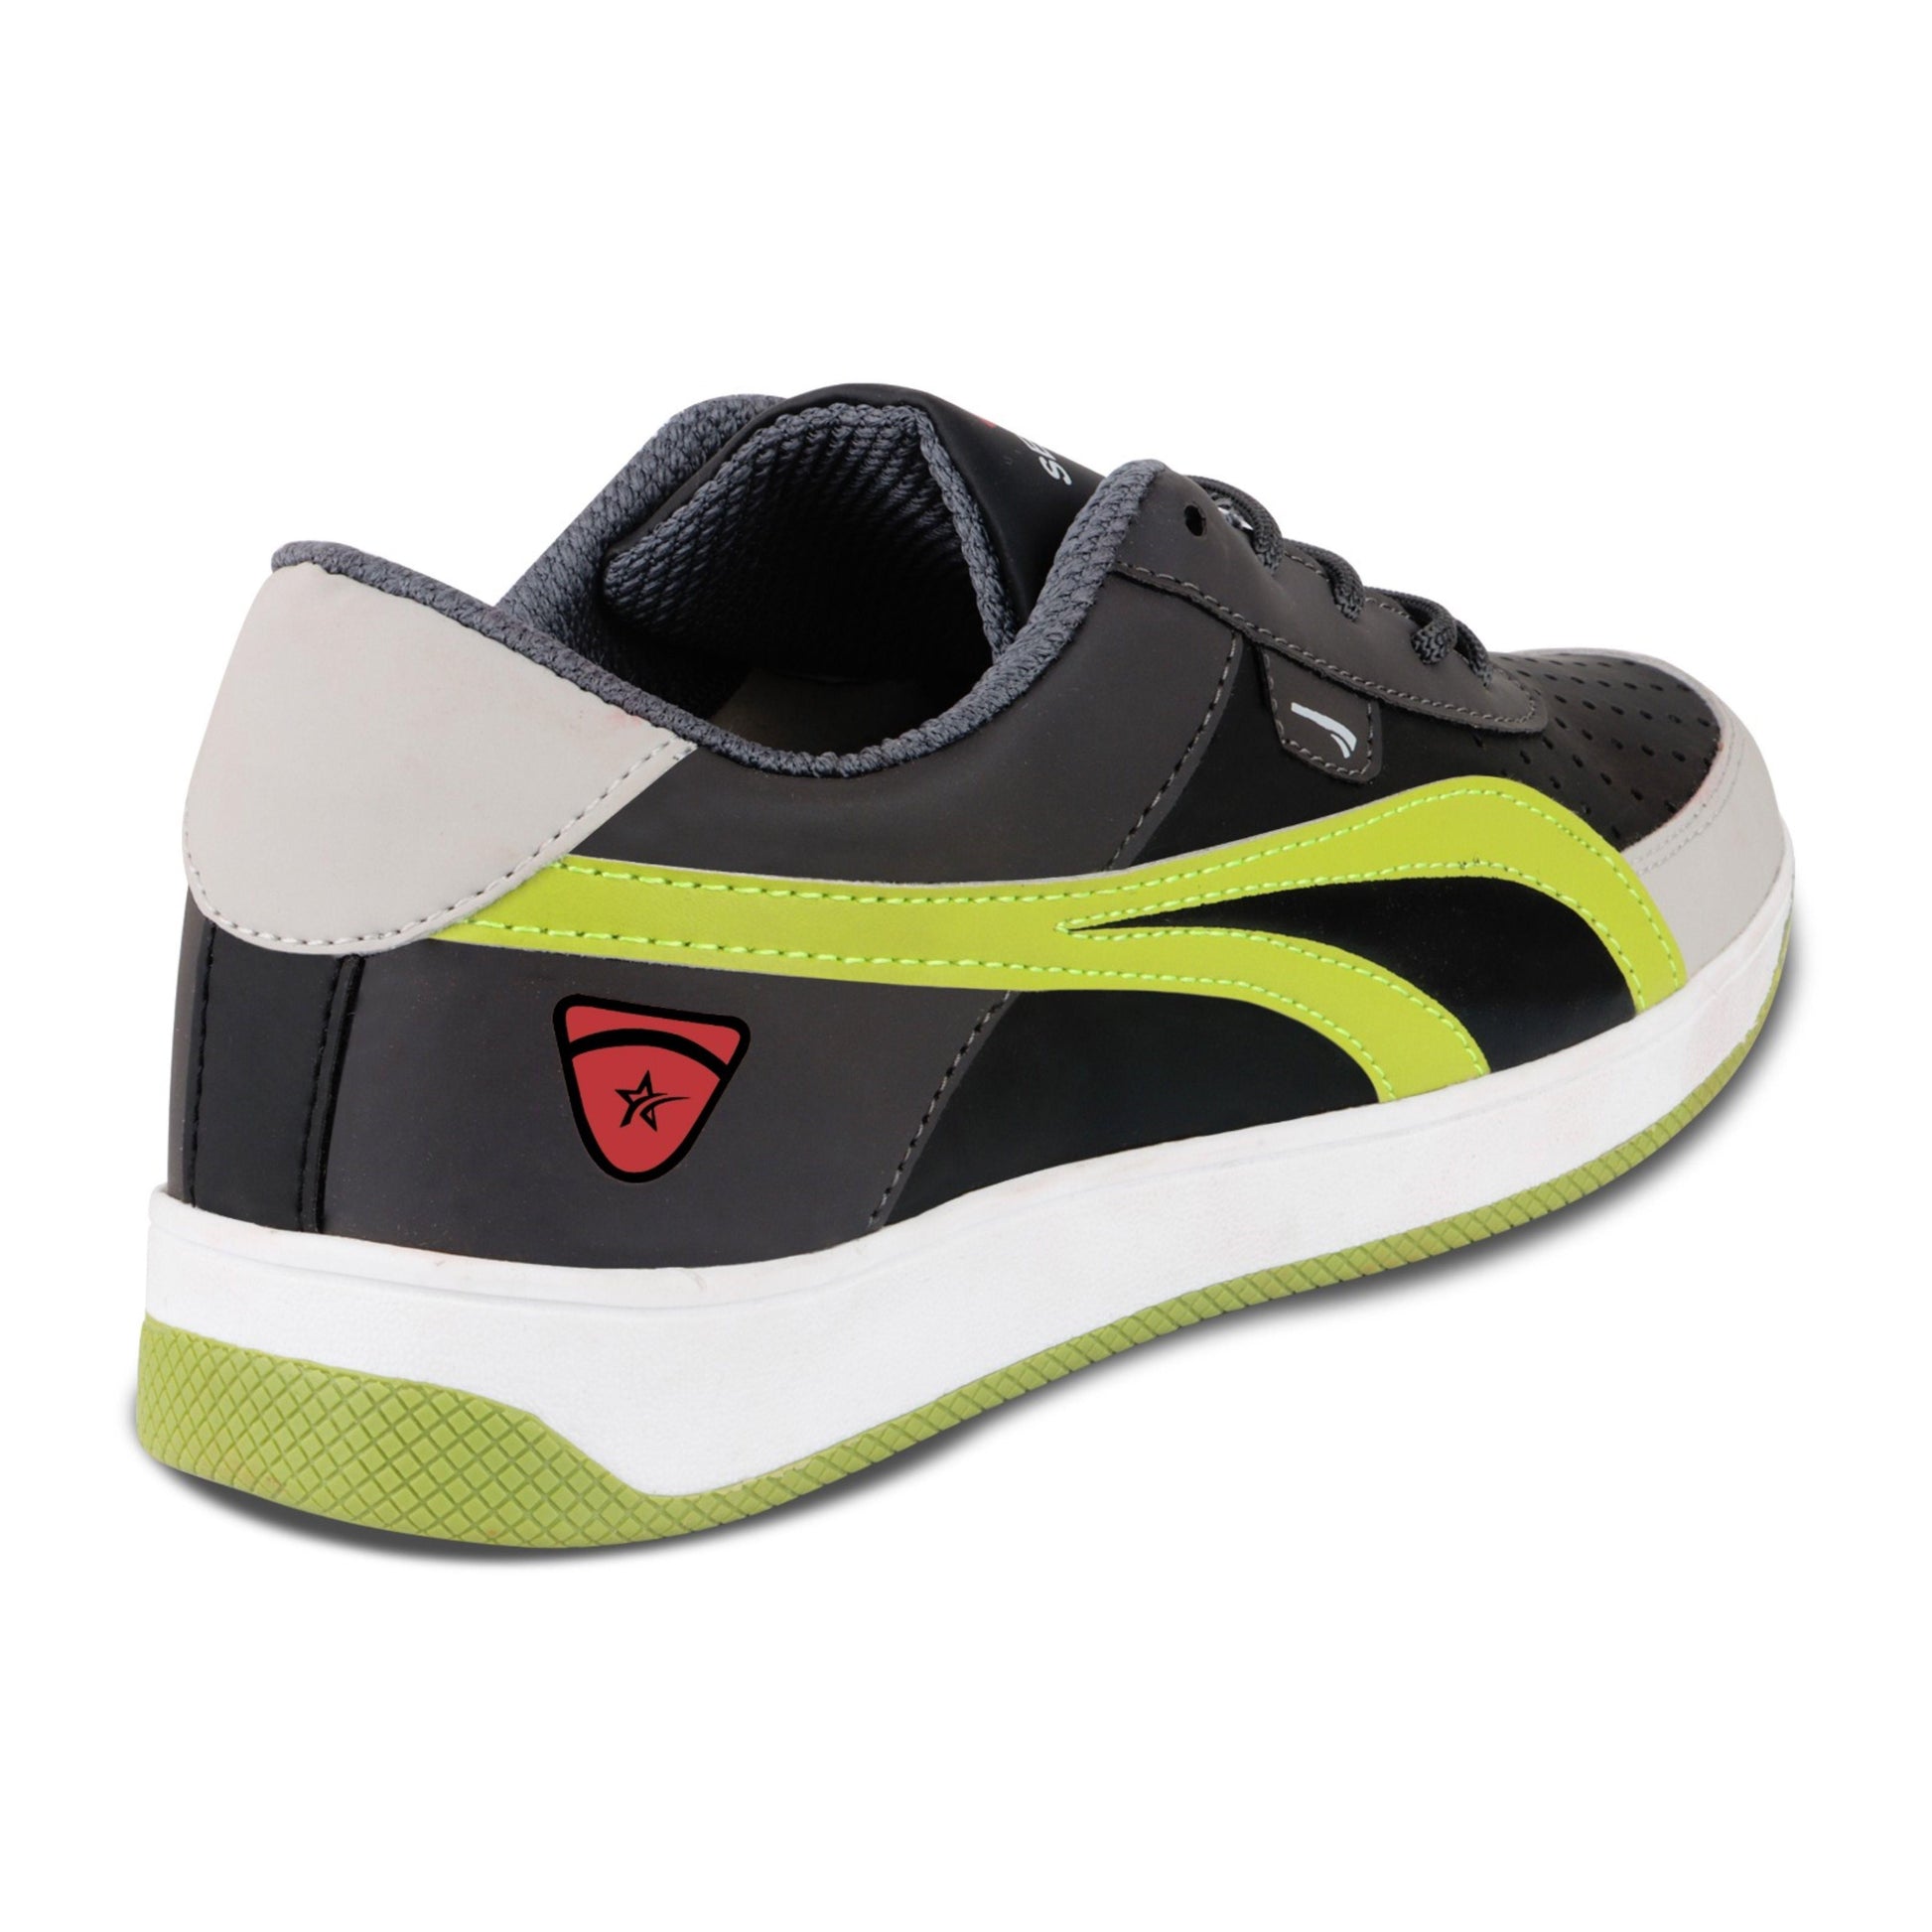 Richale Segastar Black White and Parrot Green Mens Casual Shoes - Gymom Wellness Warehouse 